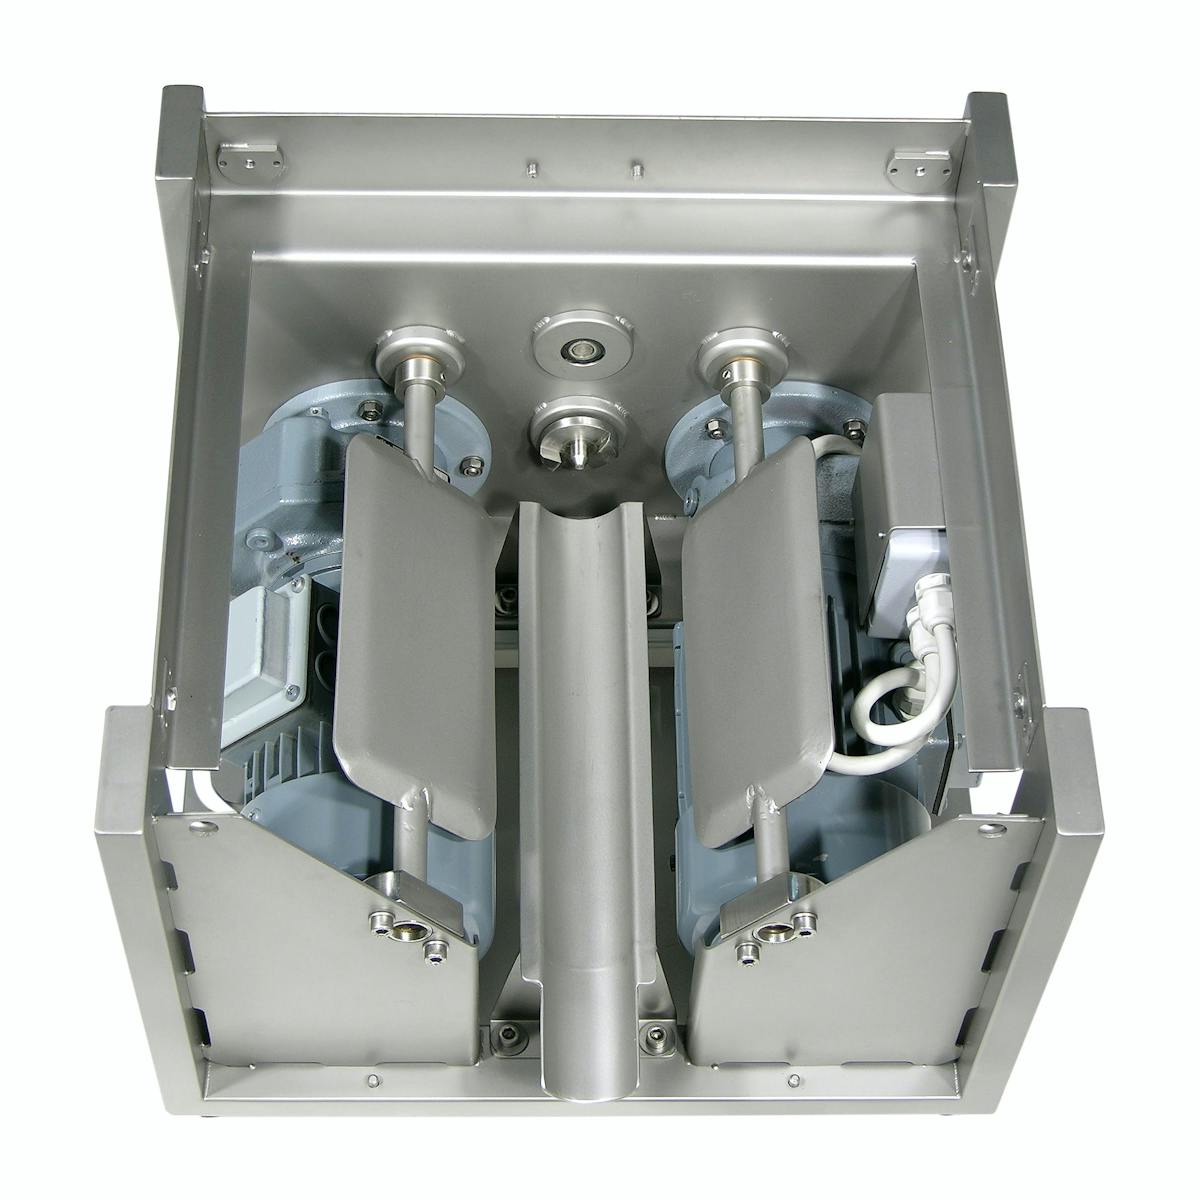 Figure 5: External mechanical paddles gently massage the flexible hopper wall, keeping the material in constant motion and facilitating its smooth transfer into the dosing screw below the hopper.